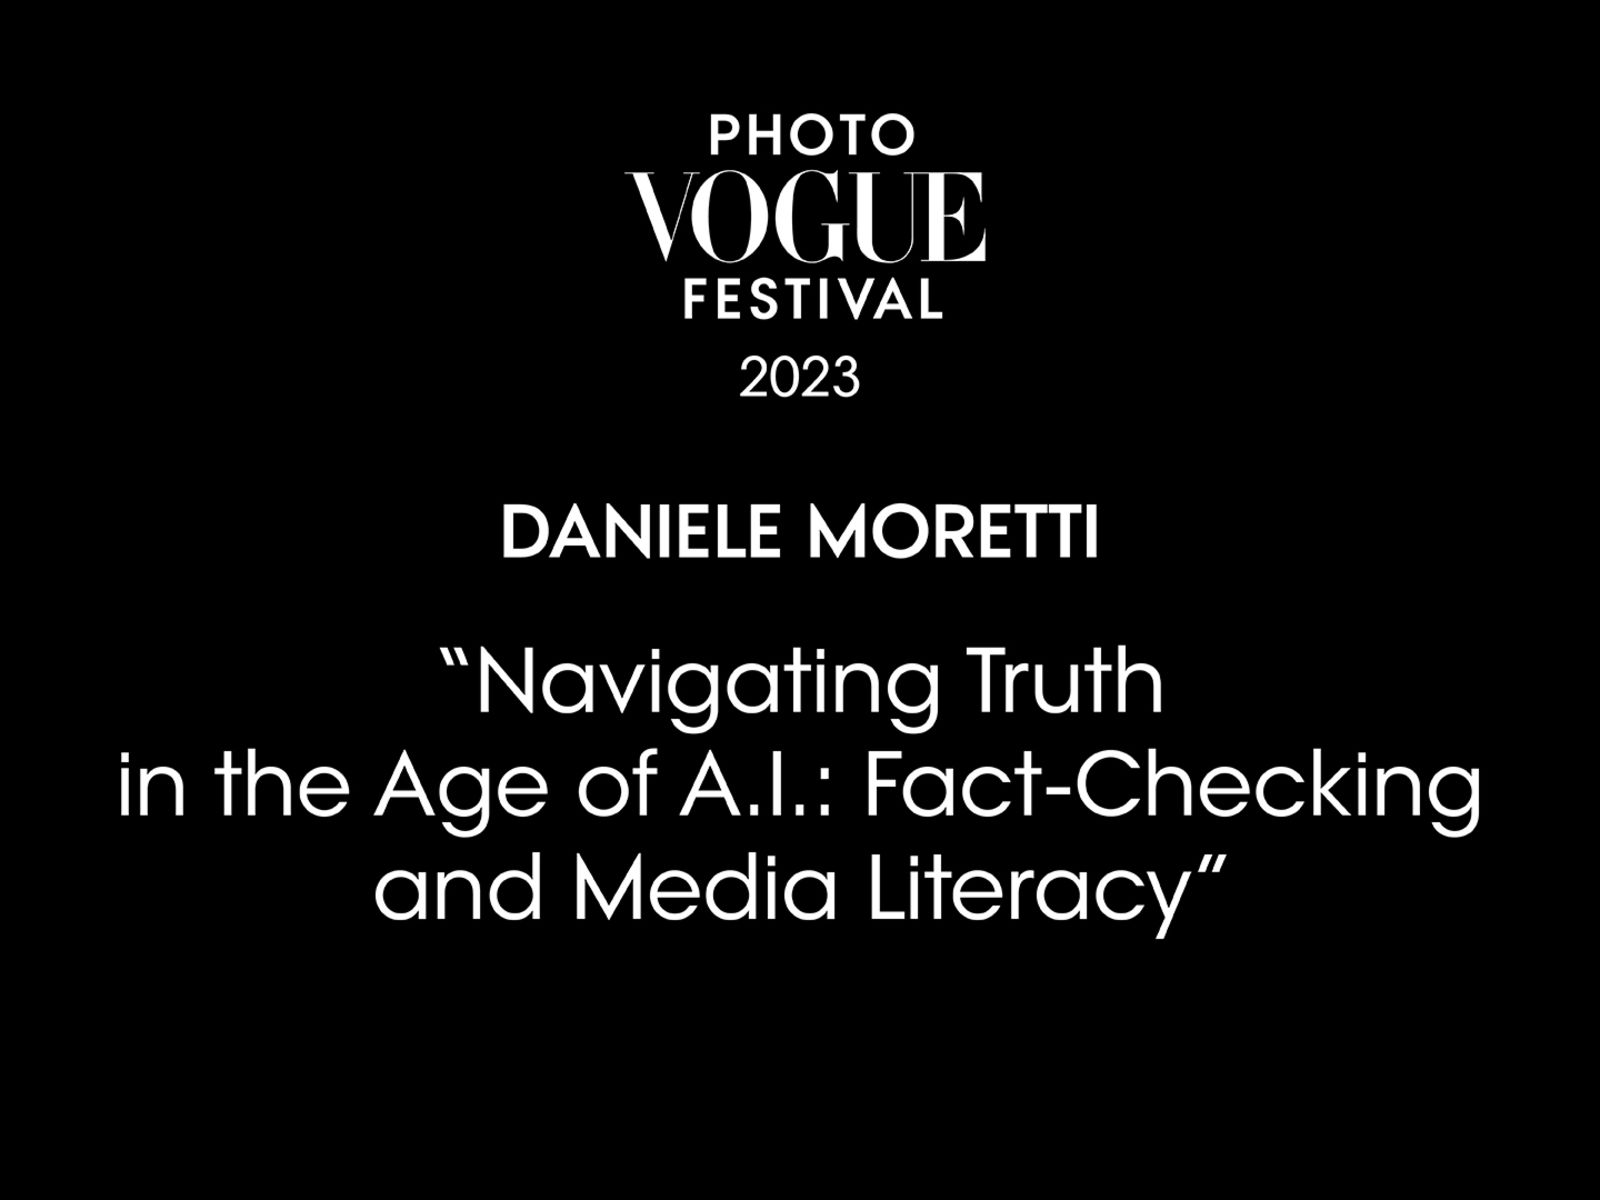 Navigating Truth in the Age of A.I.: Fact-Checking and Media Literacy | PhotoVogue Festival 2023: What Makes Us Human? Image in the Age of A.I.